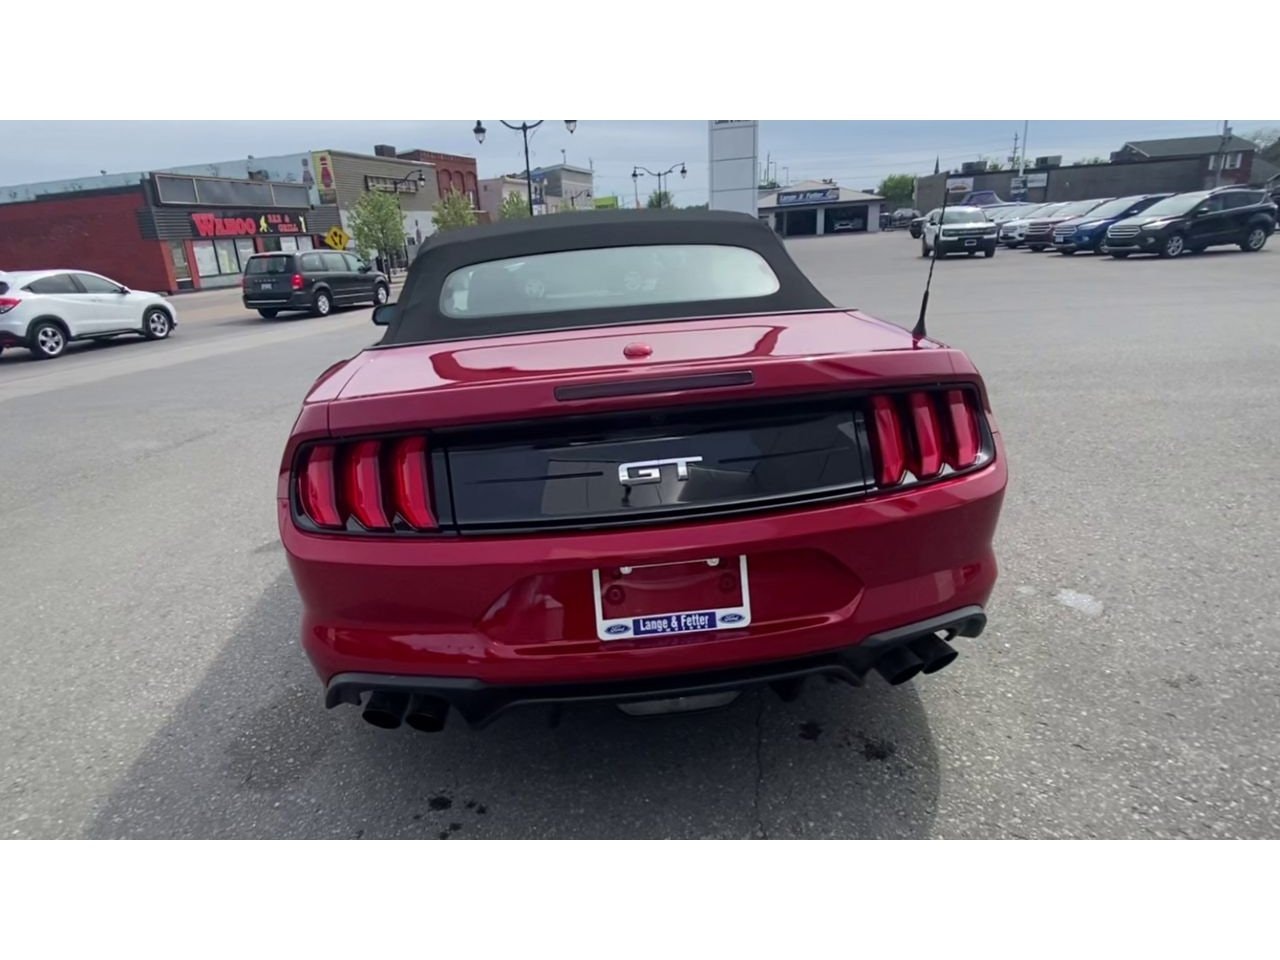 2020 Ford Mustang - P20422 Full Image 7